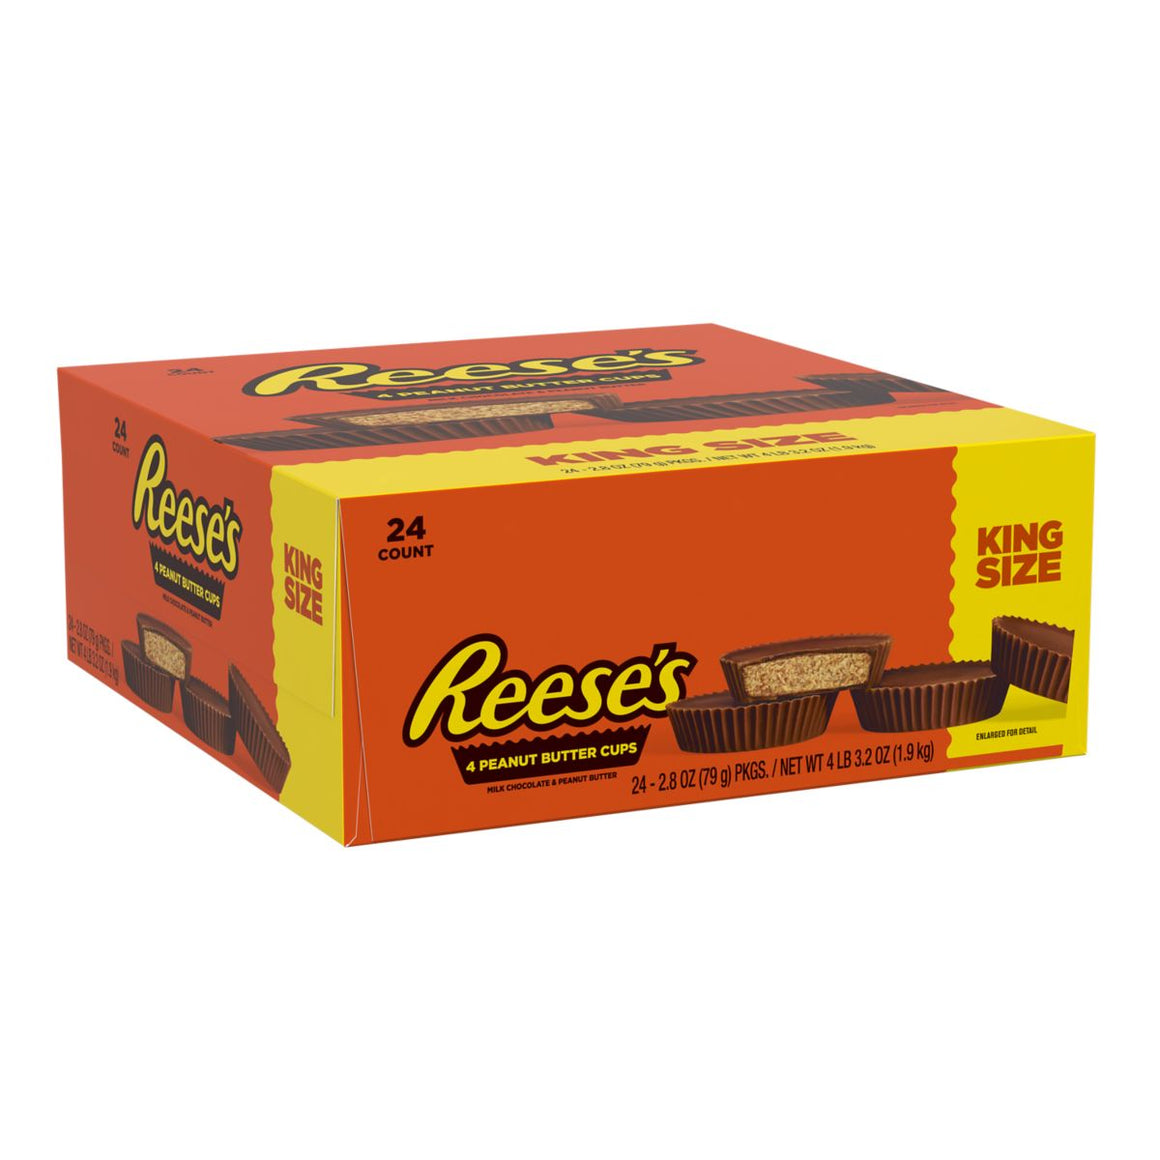 All City Candy Reese's Peanut Butter Cups King Size 4 Cup 2.8 oz. Candy Bars Hershey's 1 Pack For fresh candy and great service, visit www.allcitycandy.com